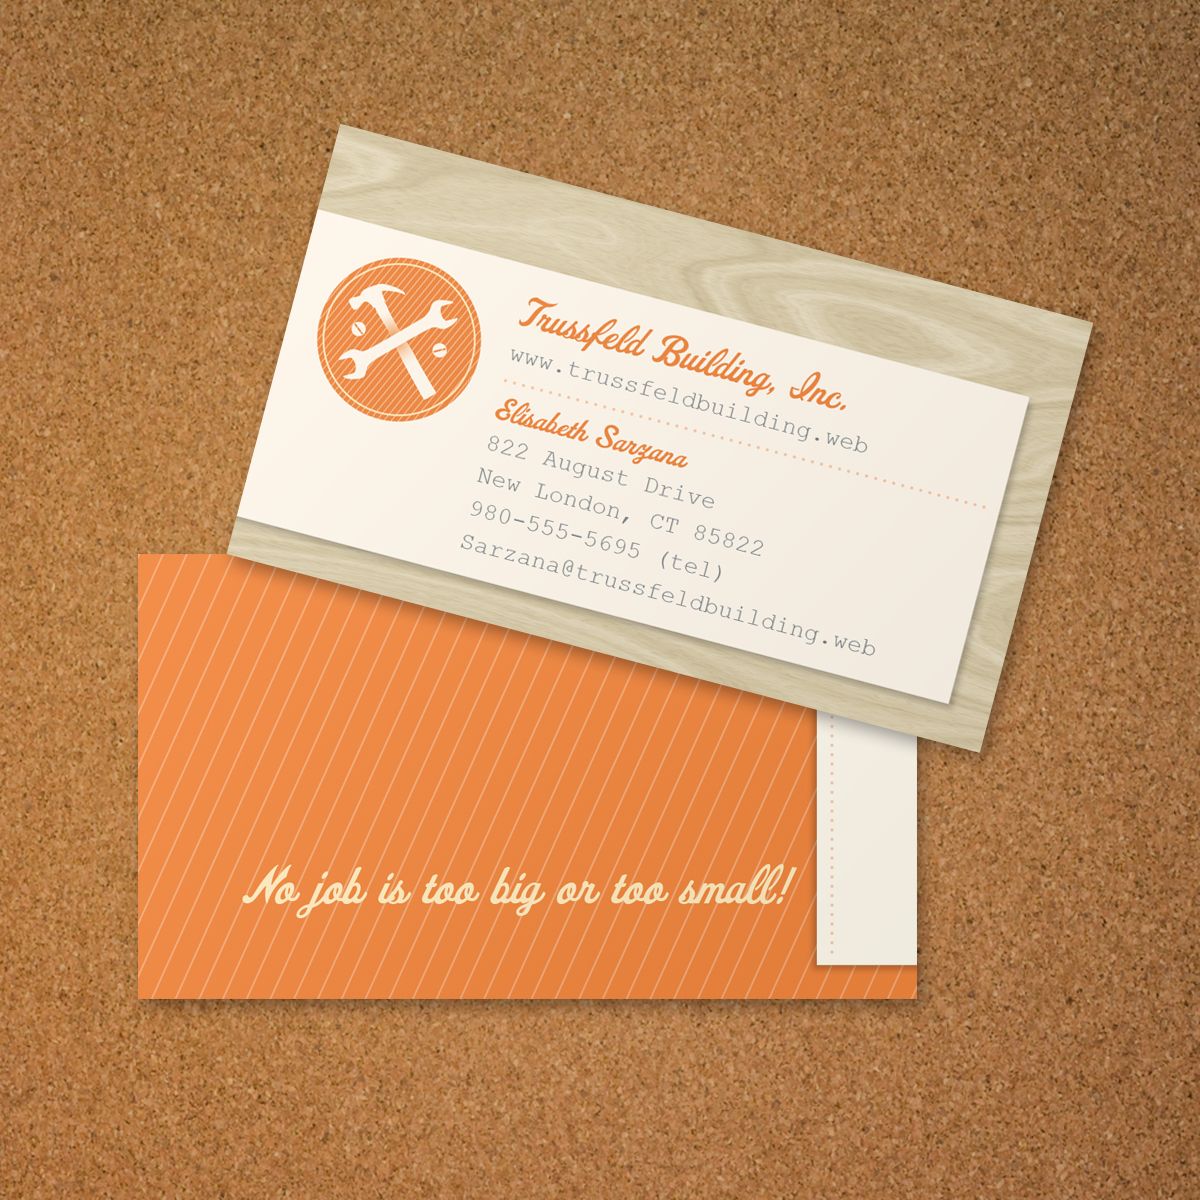 rounded business cards vistaprint 2